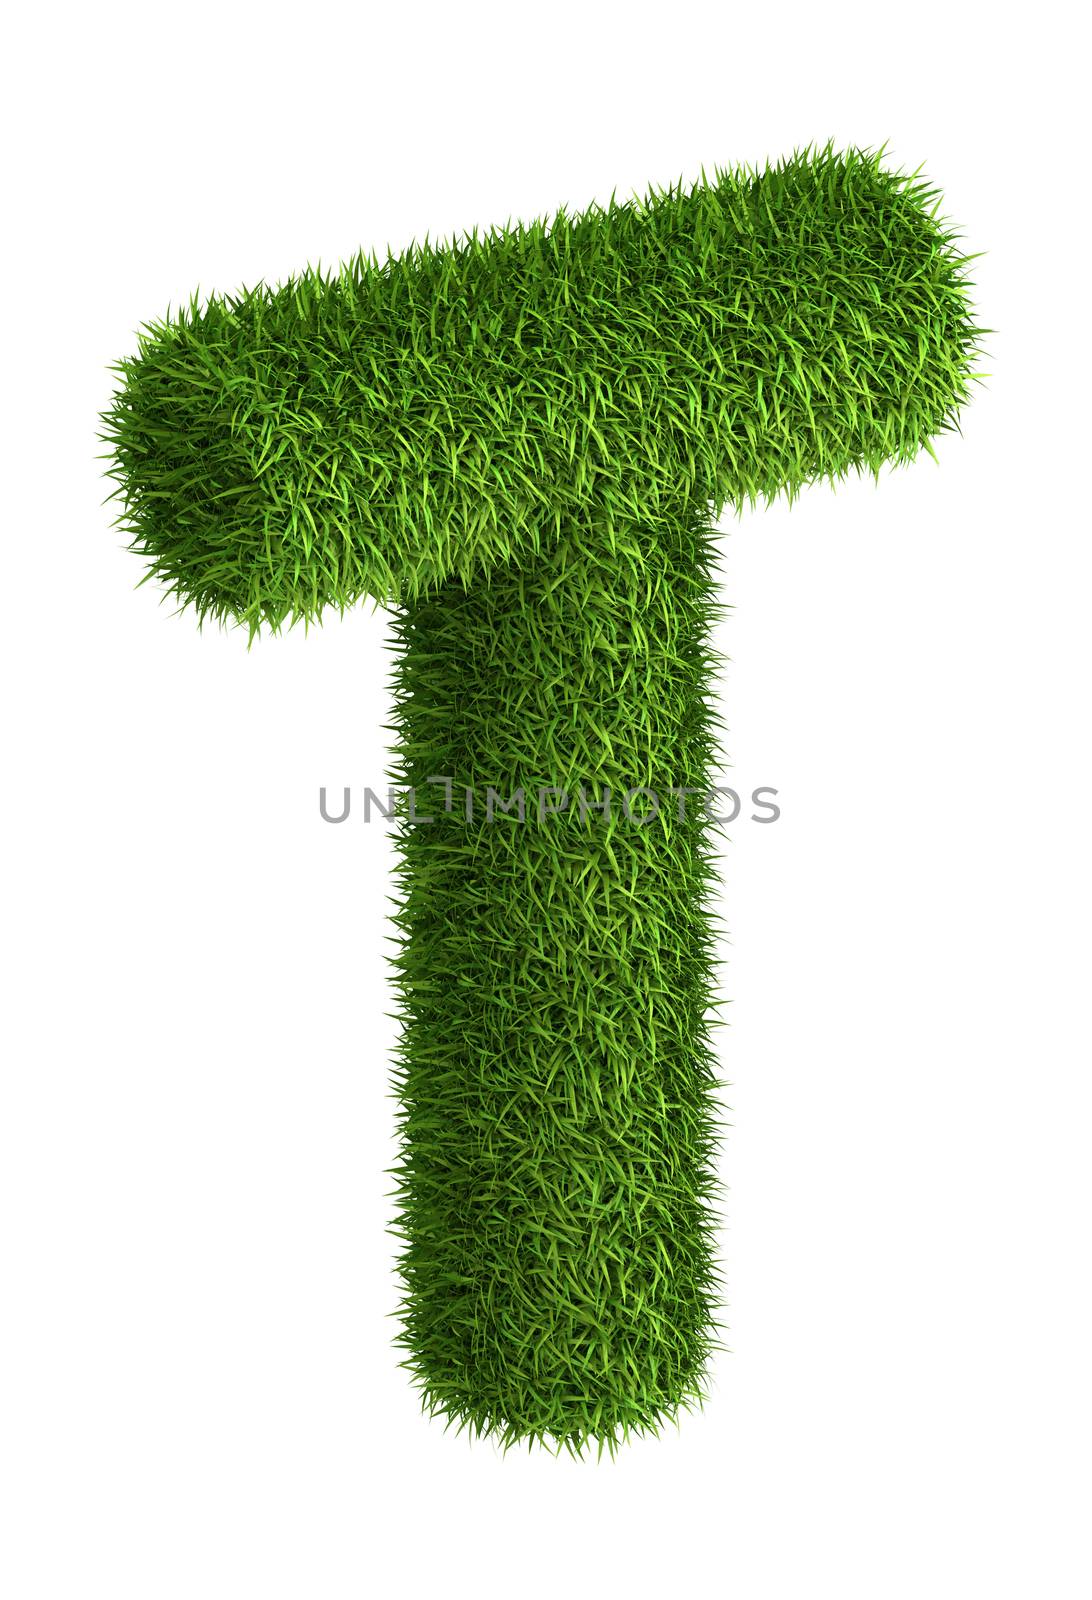 Natural grass letter T by iunewind